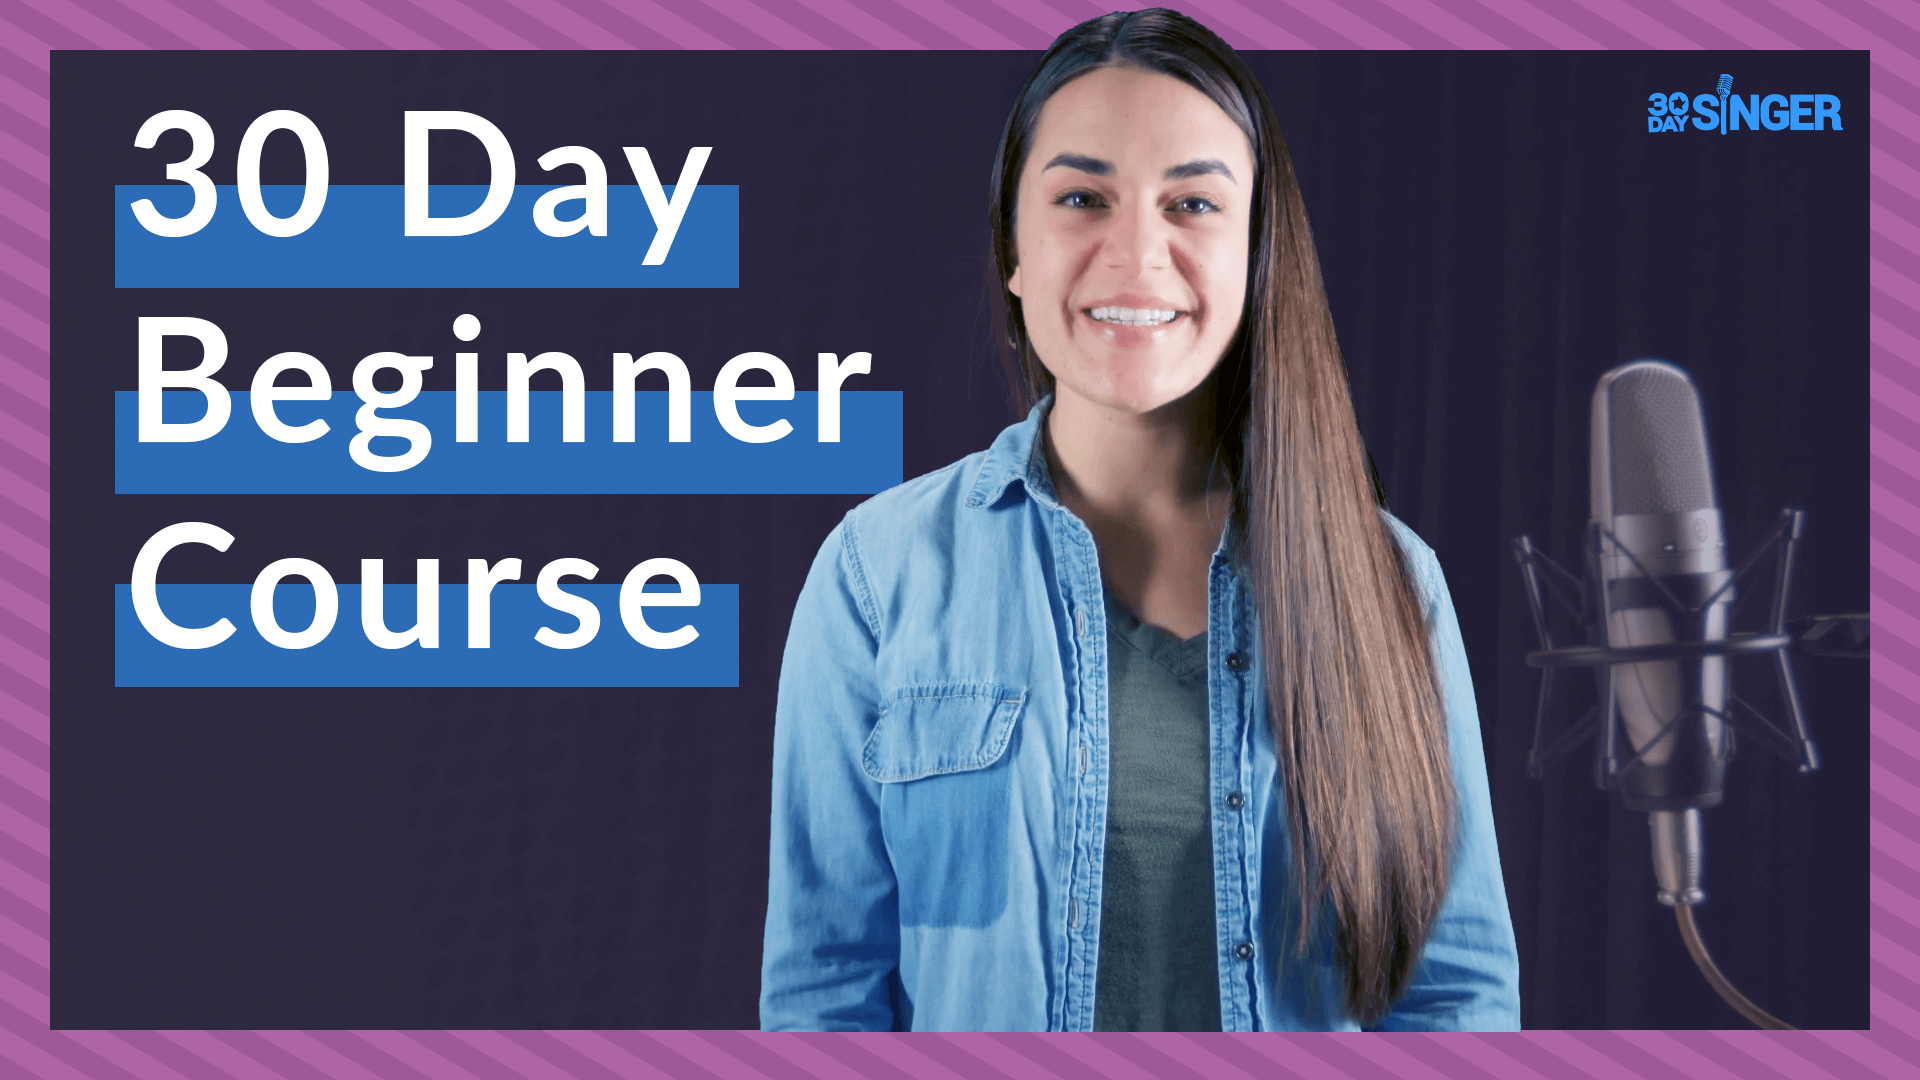 30 Day Beginner Course with Camille